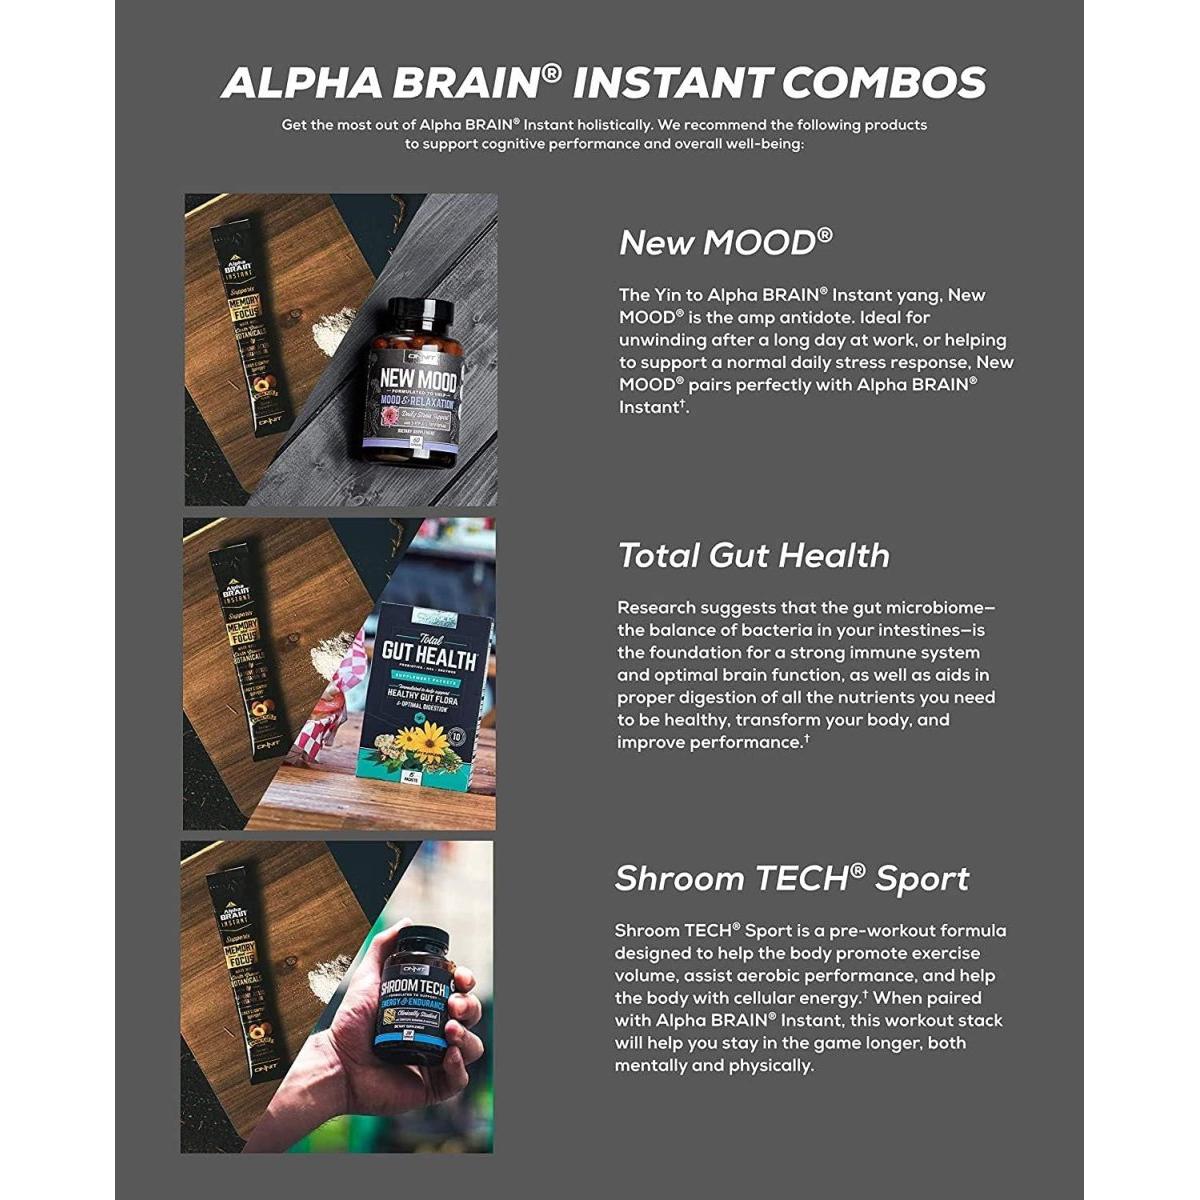 Onnit Alpha Brain Instant (30Ct Box) - Premium Nootropic Brain Booster Supplement - Boost Focus, Concentration & Memory - Alpha GPC, L Theanine, Bacopa Monnieri, Huperzine A, Vitamin B6 - Glam Global UK